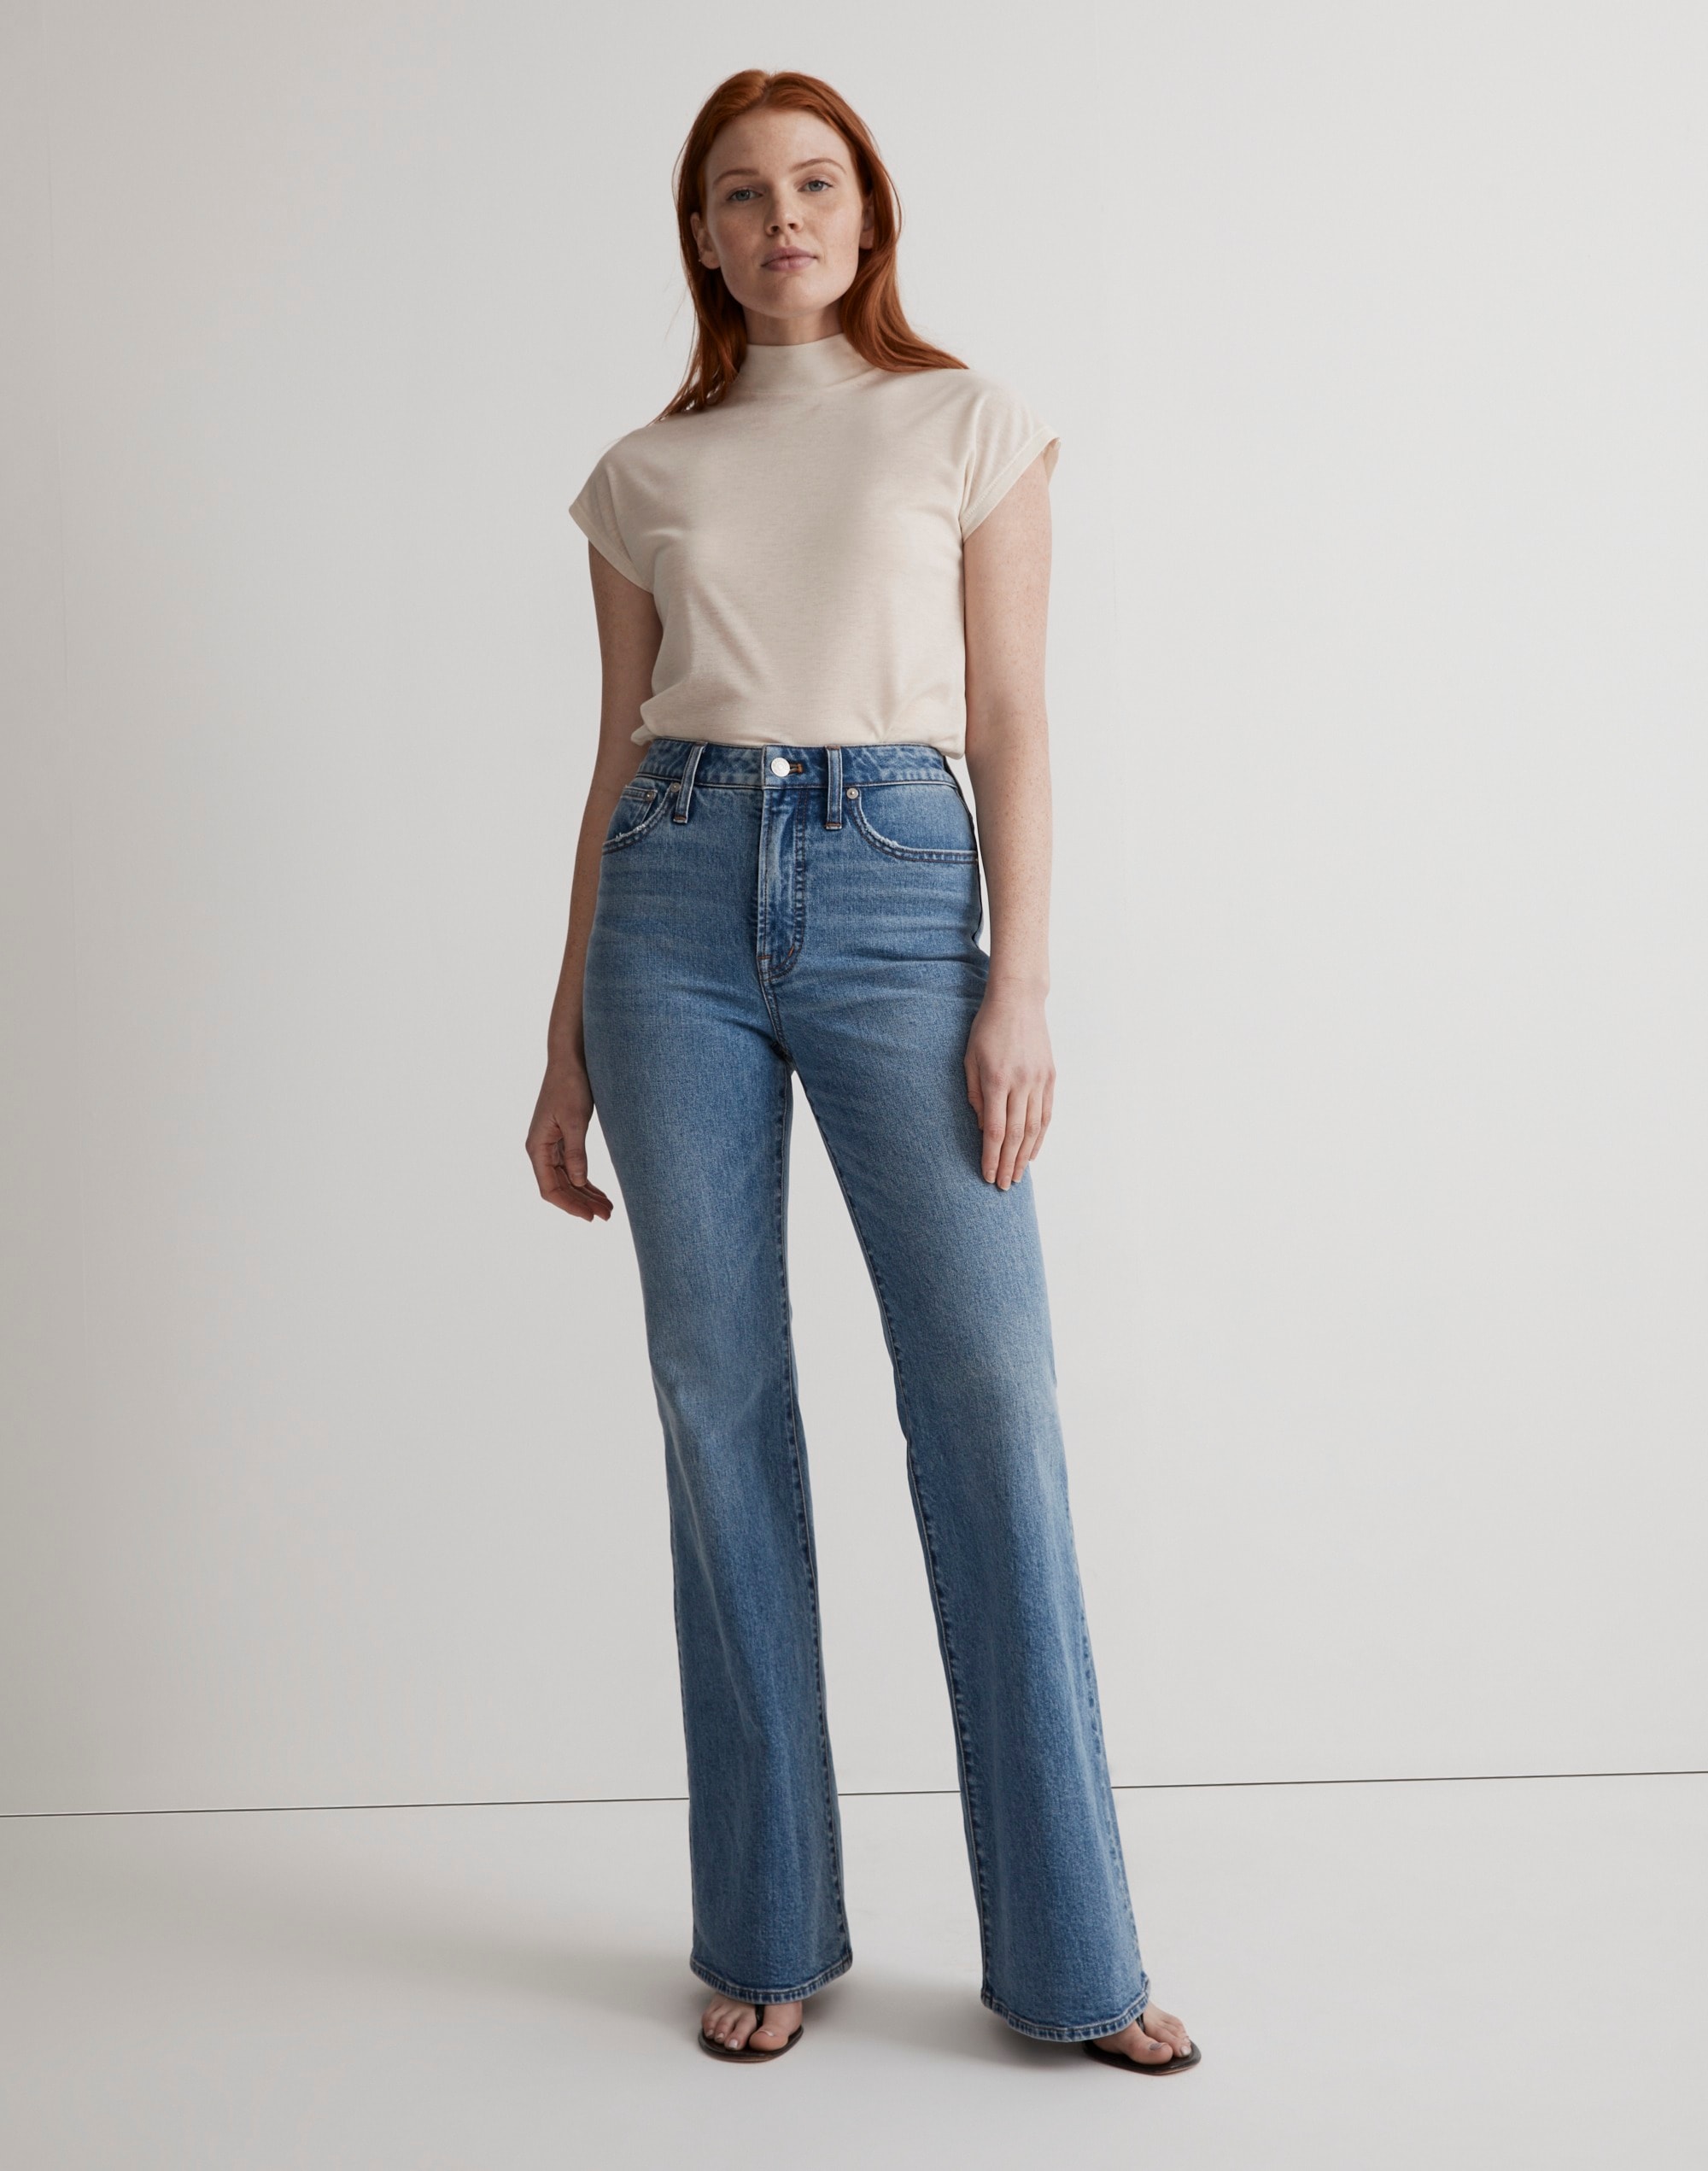 The Curvy Perfect Vintage Flare Jean in Tarlow Wash